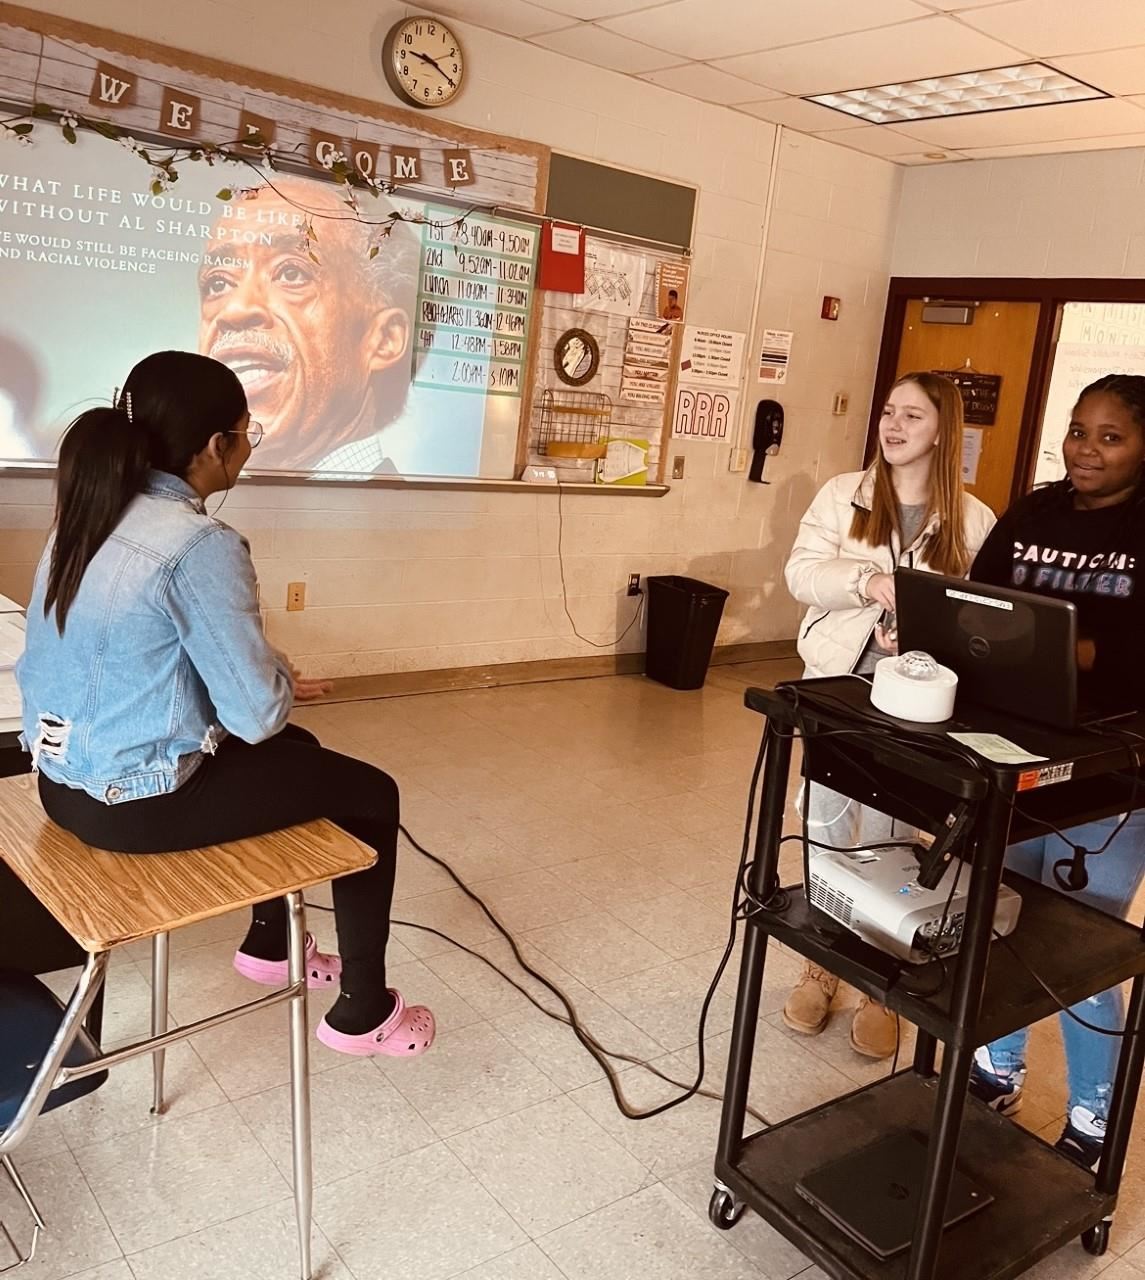 East Middle School students giving a presentation on Al Sharpton.